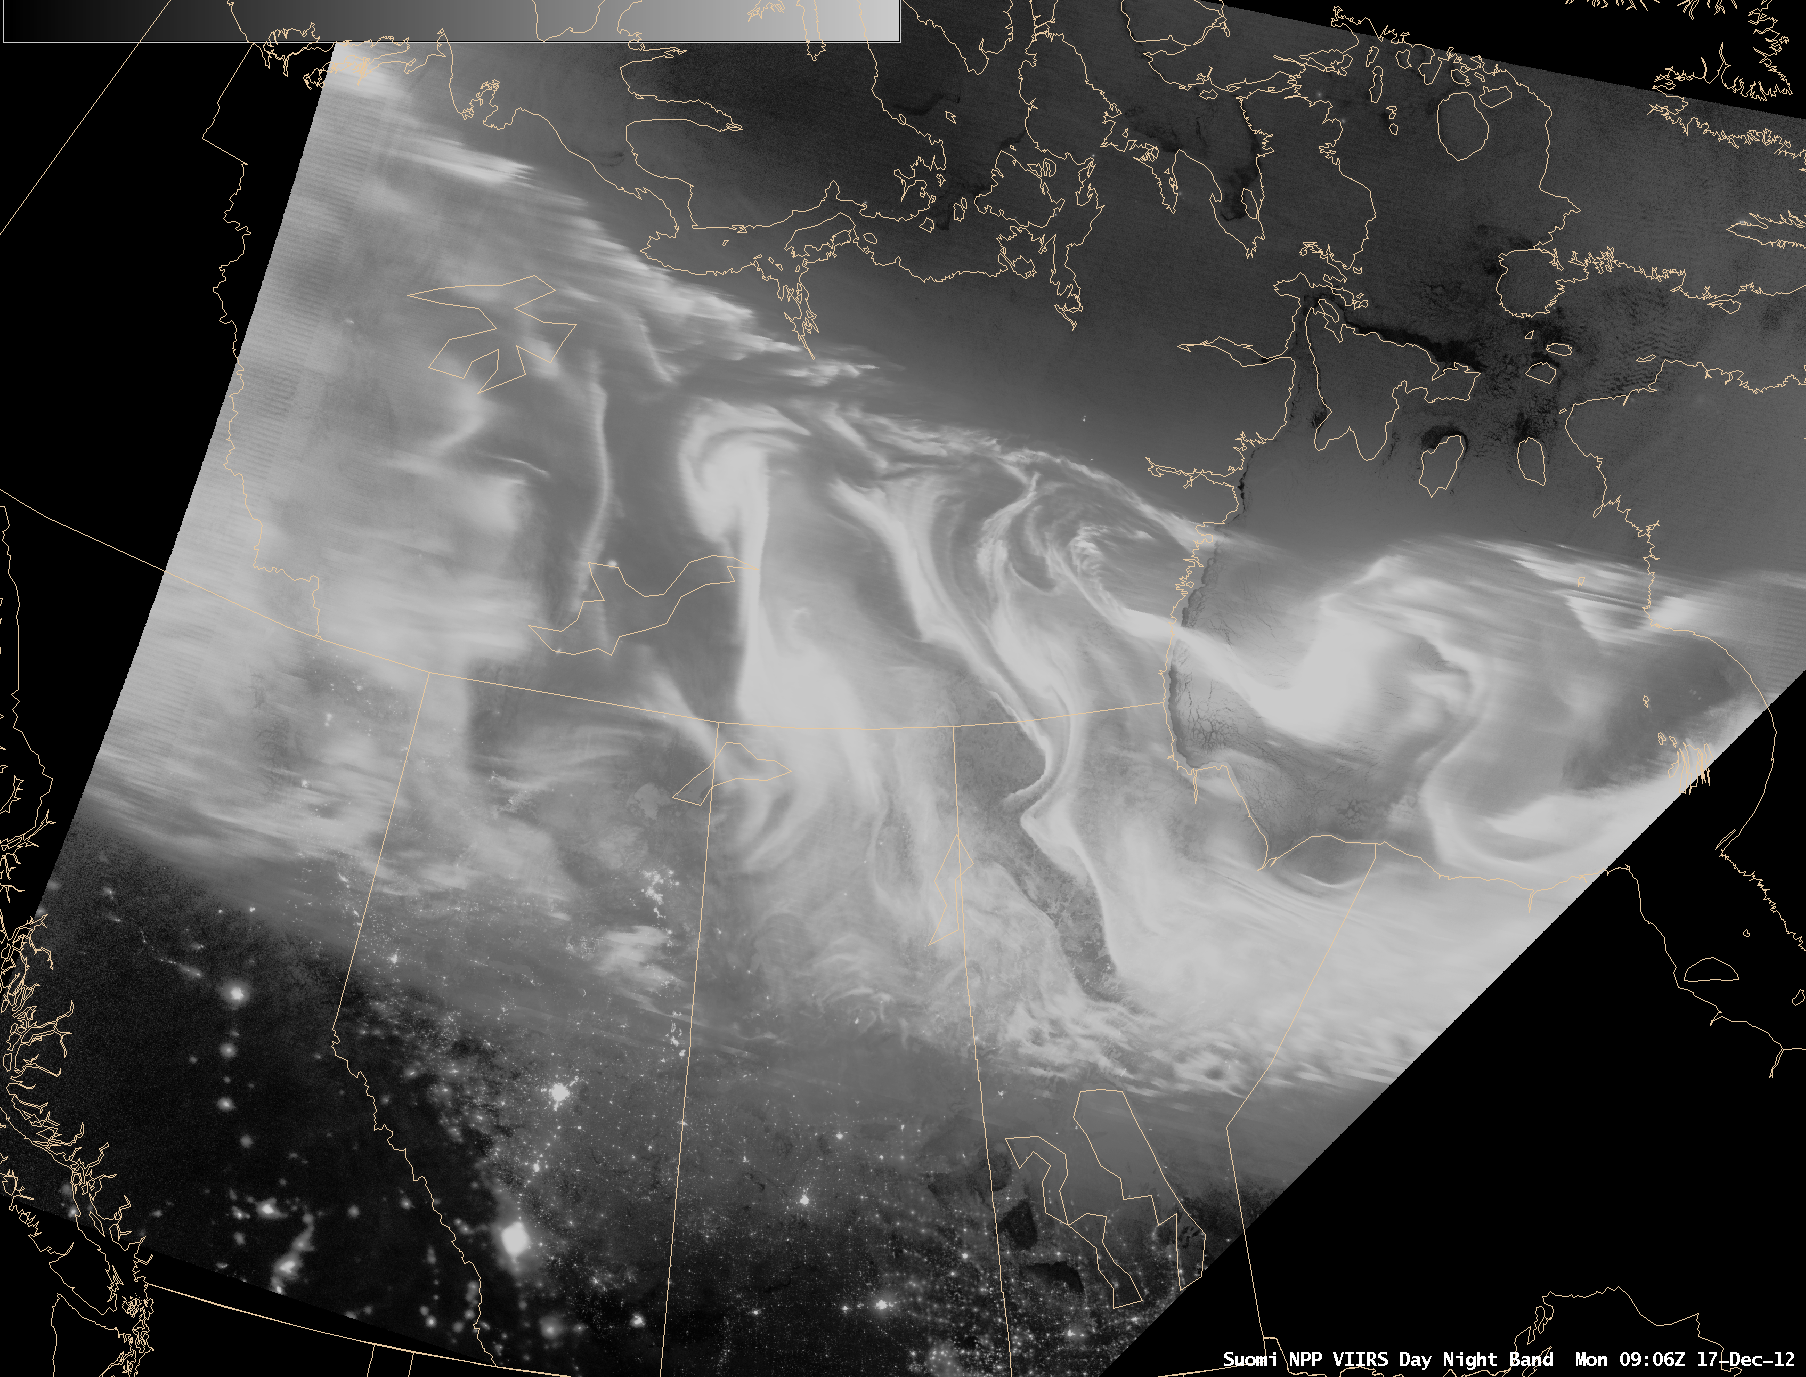 Suomii NPP VIIRS 0.7 Âµm Day/Night Band and 11.45 Âµm IR channel images